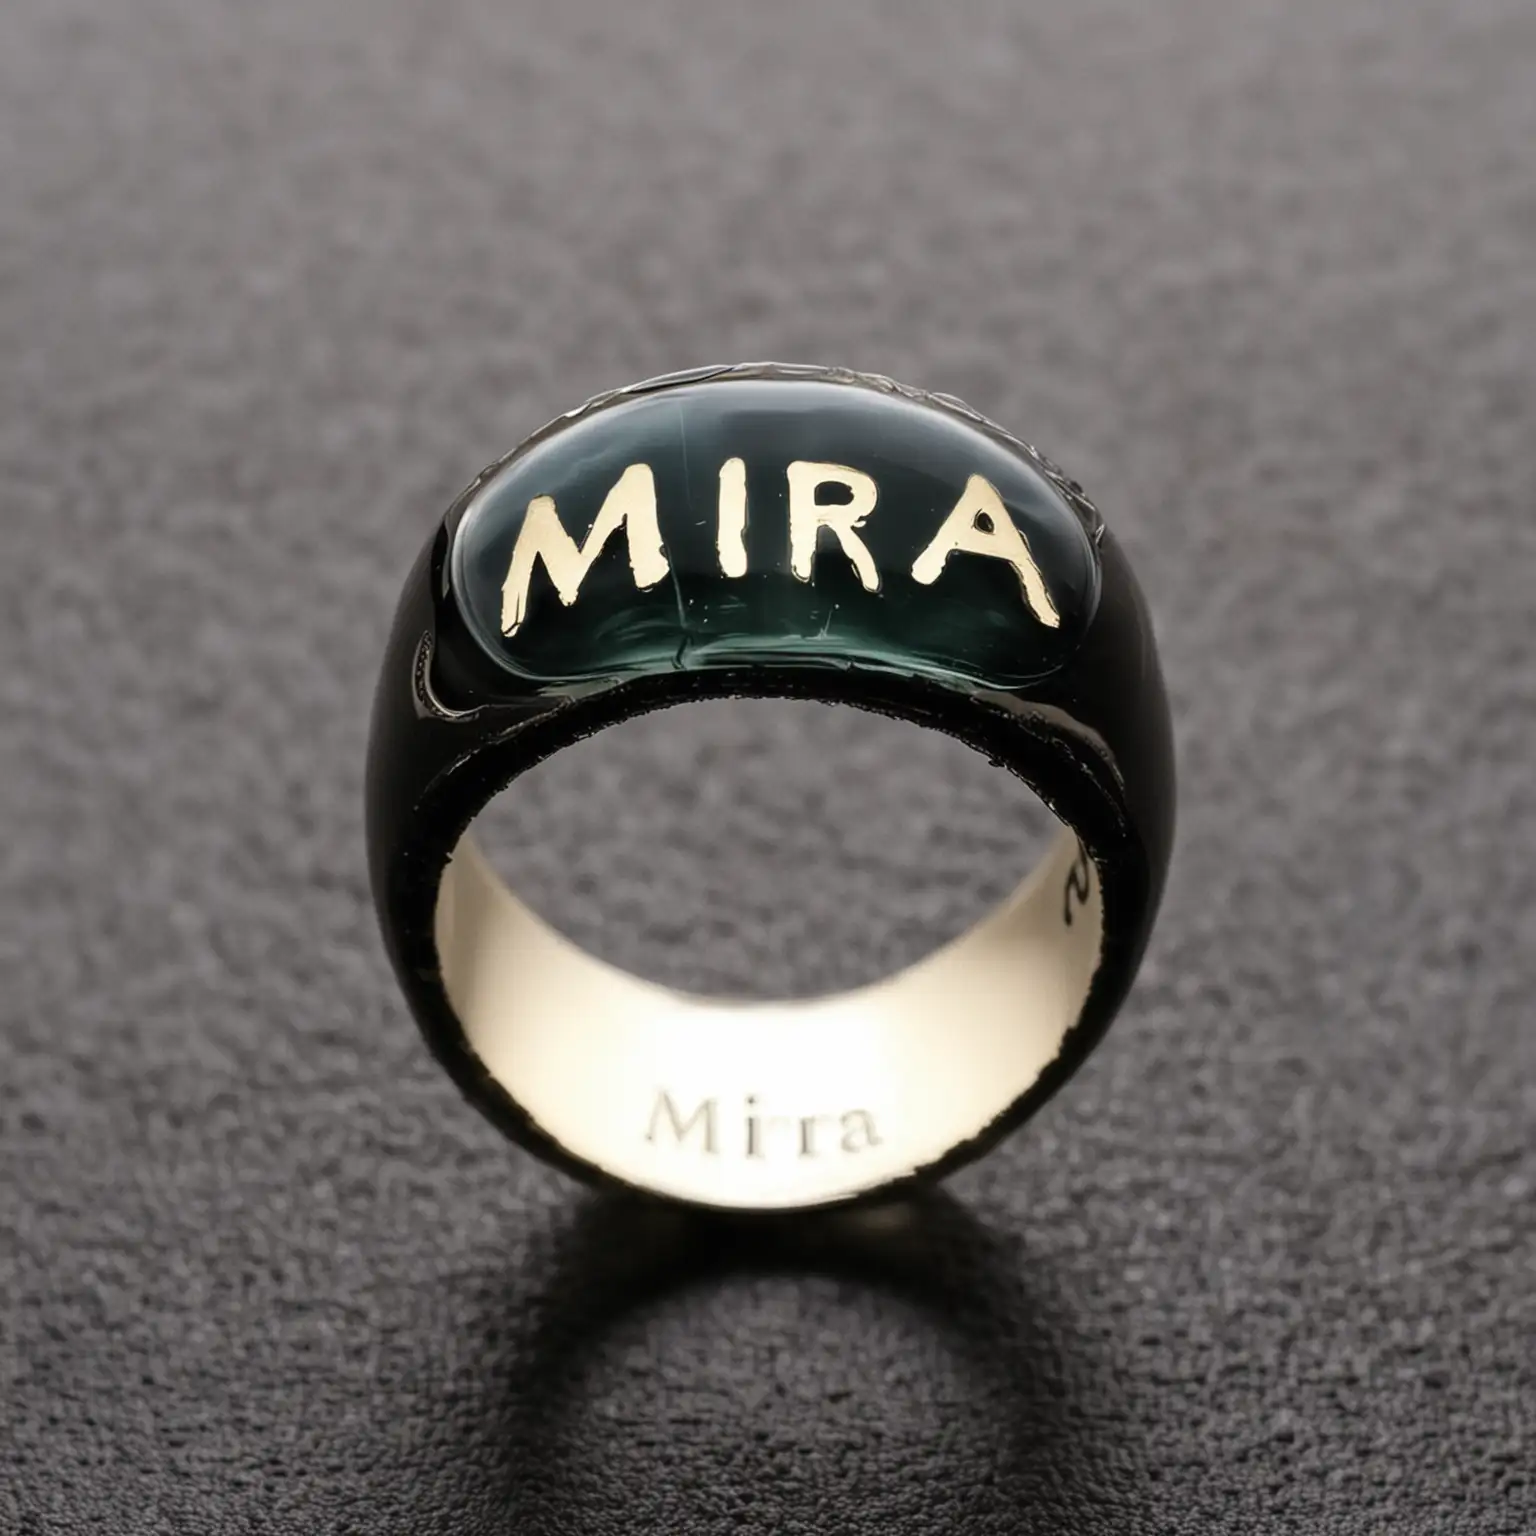 resin ring with this name on it "mira" with dark shadow backgranod